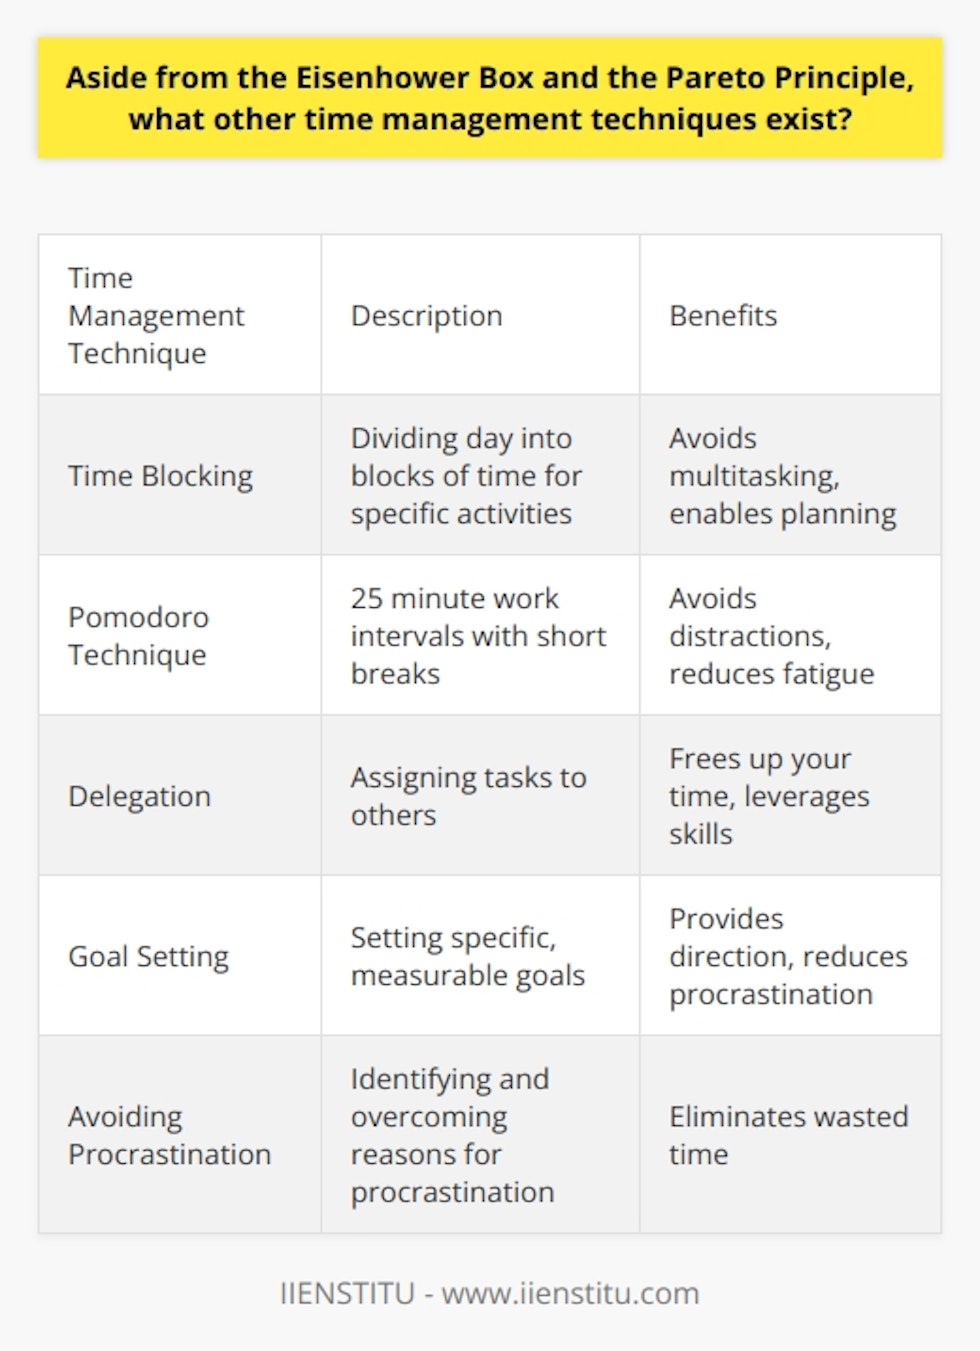 Here is some detailed content on additional time management techniques beyond the Eisenhower Box and Pareto Principle:Time Blocking - Involves dividing your day into blocks of time and assigning specific activities to those blocks. Helps avoid multitasking and distractions by focusing on one task at a time. Useful for tackling big projects by breaking them into timed blocks. Enables planning your day efficiently.Pomodoro Technique- Breaks work into 25 minute intervals called Pomodoros separated by short breaks. The timer helps you focus for 25 minute bursts. After 4 Pomodoros you take a longer 15-20 minute break. Helps avoid distractions and mental fatigue. Increases productivity.Delegation  - Assigning tasks and responsibilities to others. Useful for freeing up your own time for high leverage or urgent tasks. Takes load off your shoulders. Leverages skills and abilities of others. Important for effective time management at managerial levels.Goal Setting- Setting specific, measurable and achievable goals. Enables focusing efforts on high priority tasks. Breaking bigger goals into smaller tasks helps implementation. Helps reduce procrastination by providing direction.Avoiding Procrastination- Identifying reasons for procrastination such as perfectionism, fear of failure etc. And then developing strategies to overcome them. For example, starting small, breaking tasks down, rewarding progress etc. Eliminates wasted time and ensures timely completion.